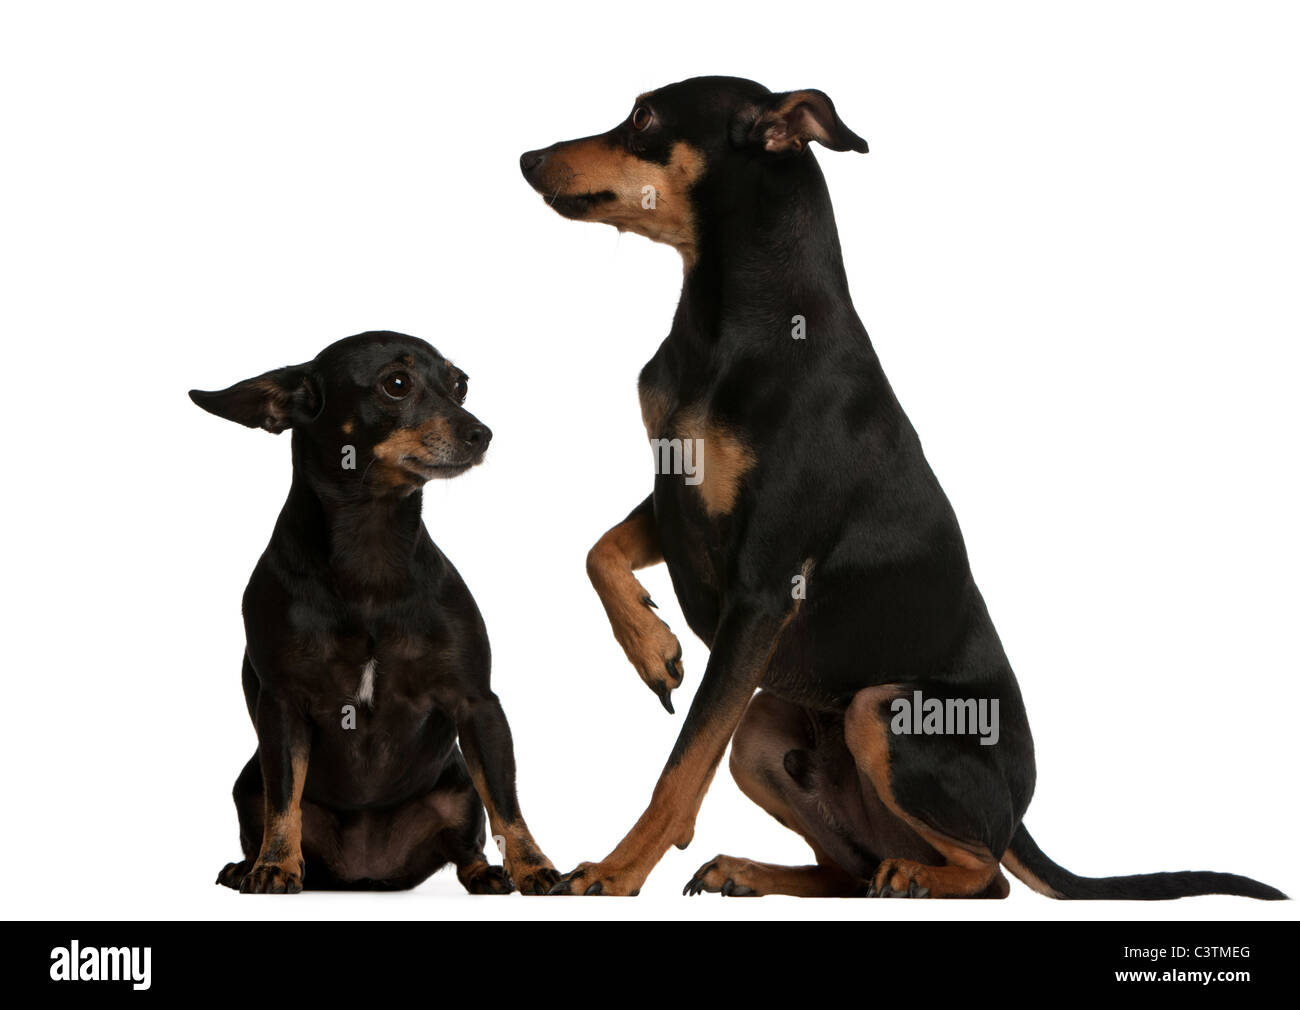 Miniature Pinscher, 7 years old, and German Pinscher, 4 years old, sitting in front of white background Stock Photo